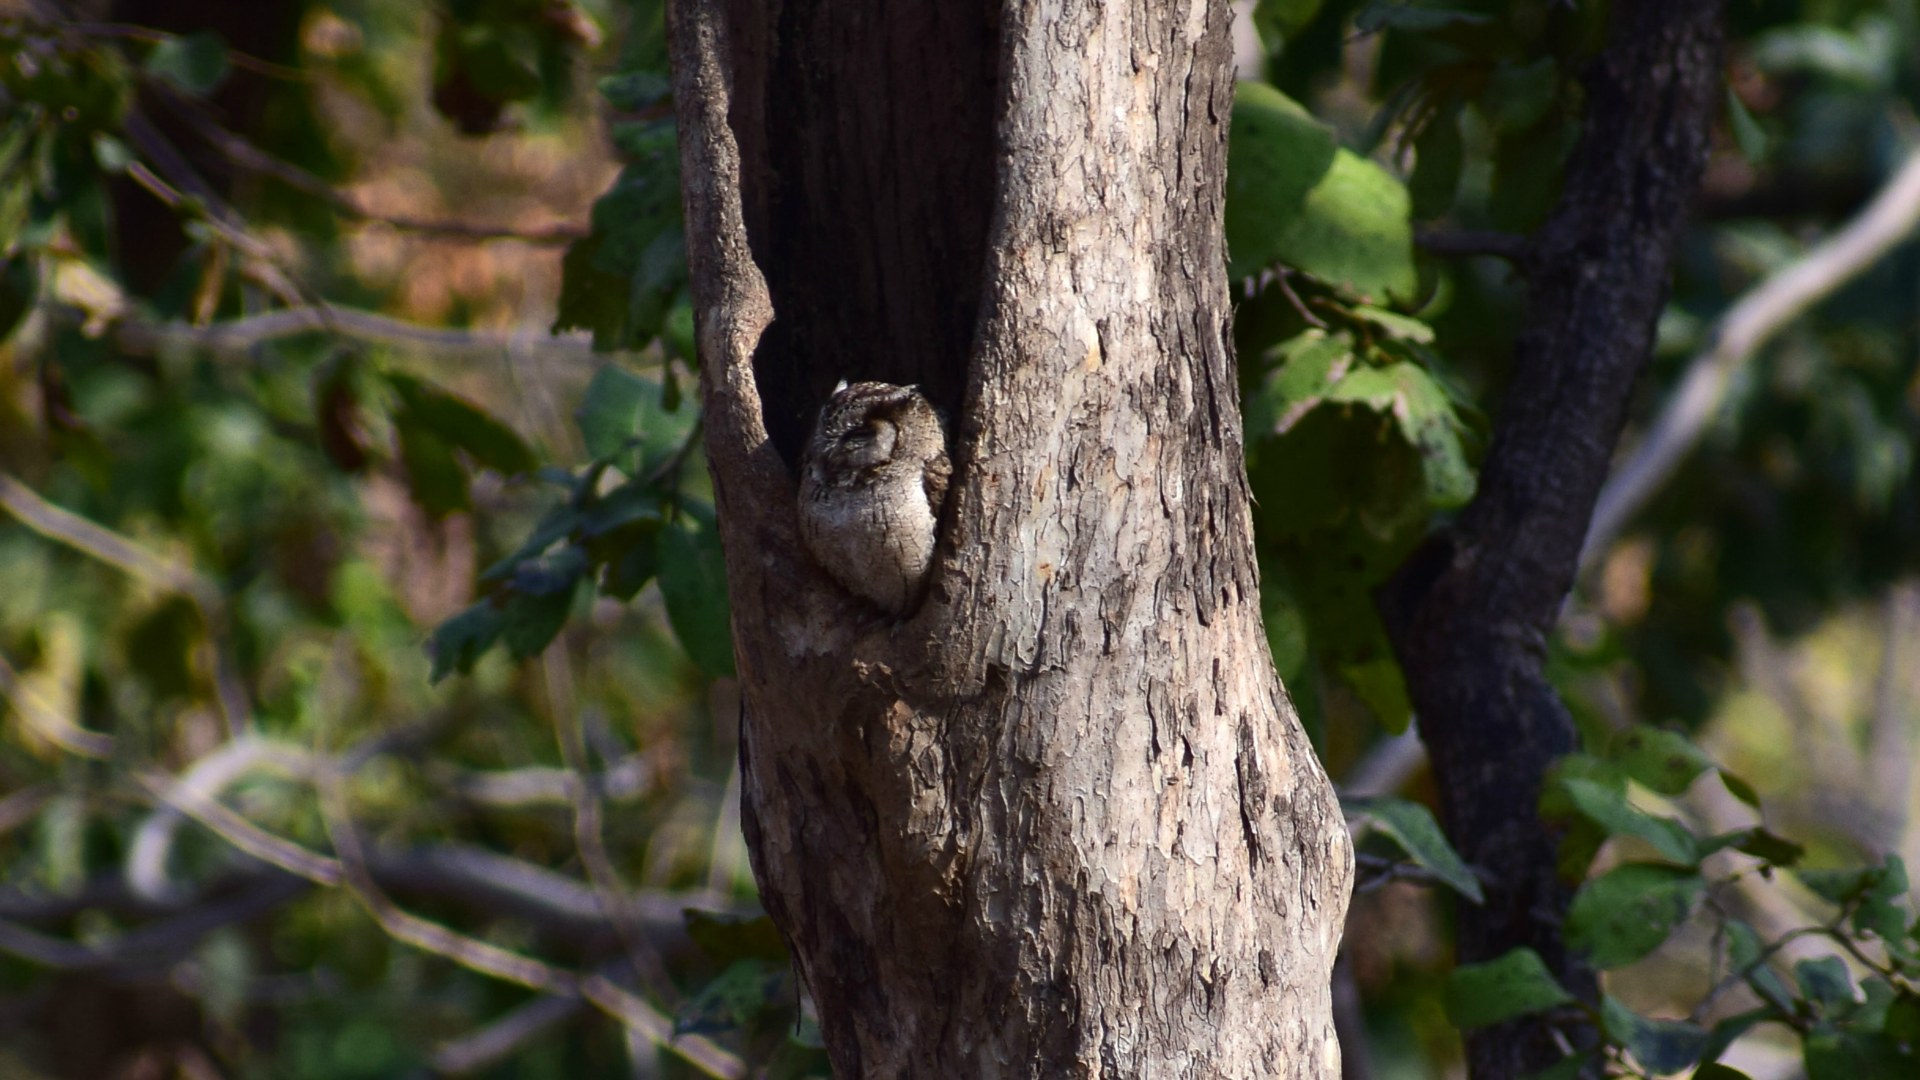 Indian Scops Owl, Pench National Park